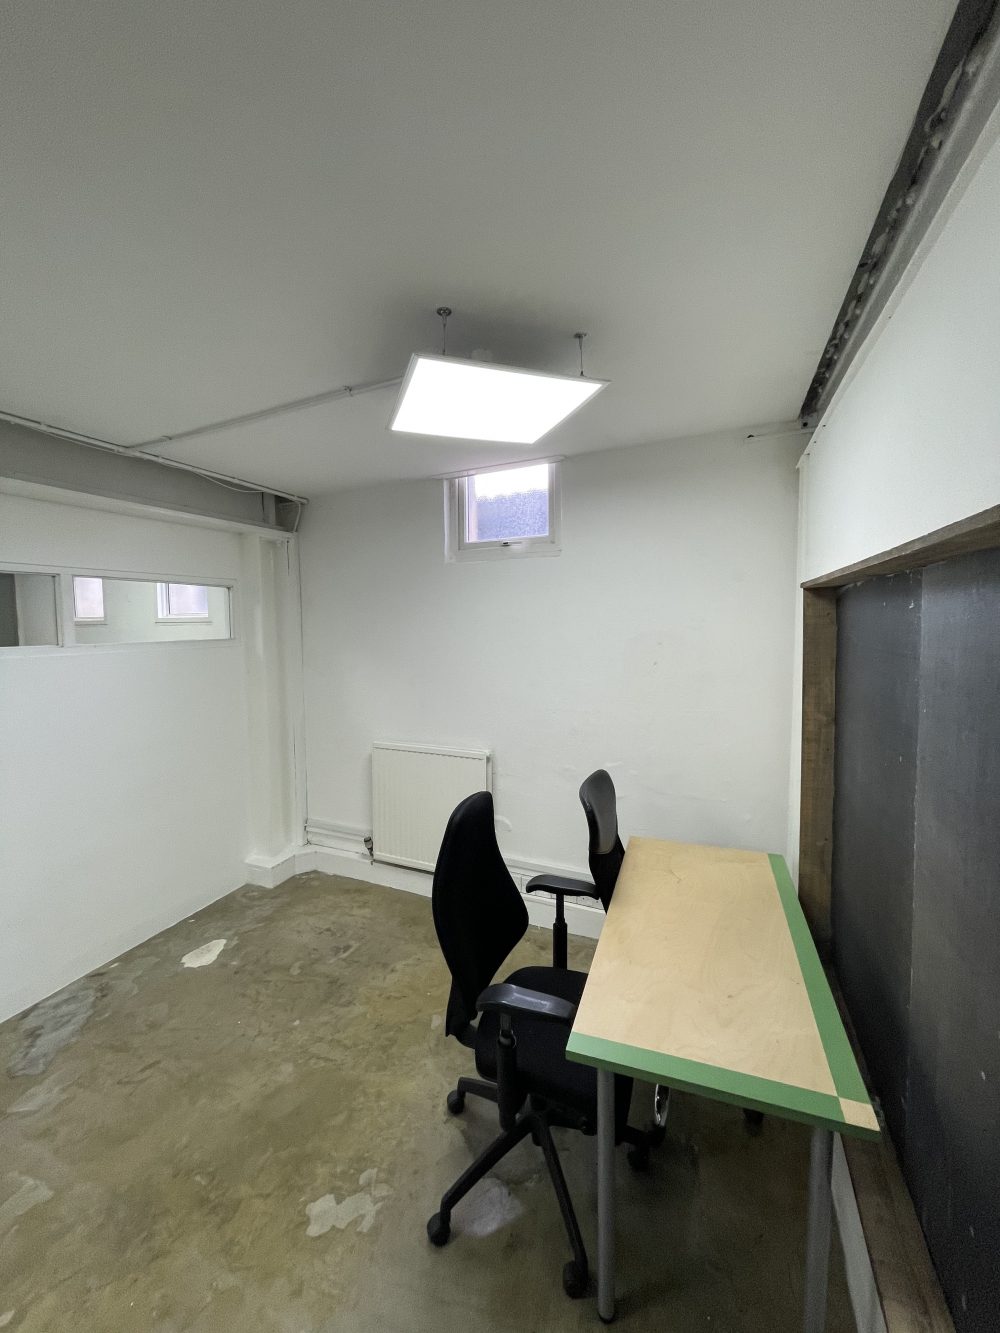 Studio Available to rent in N16 Green Lane Pic3